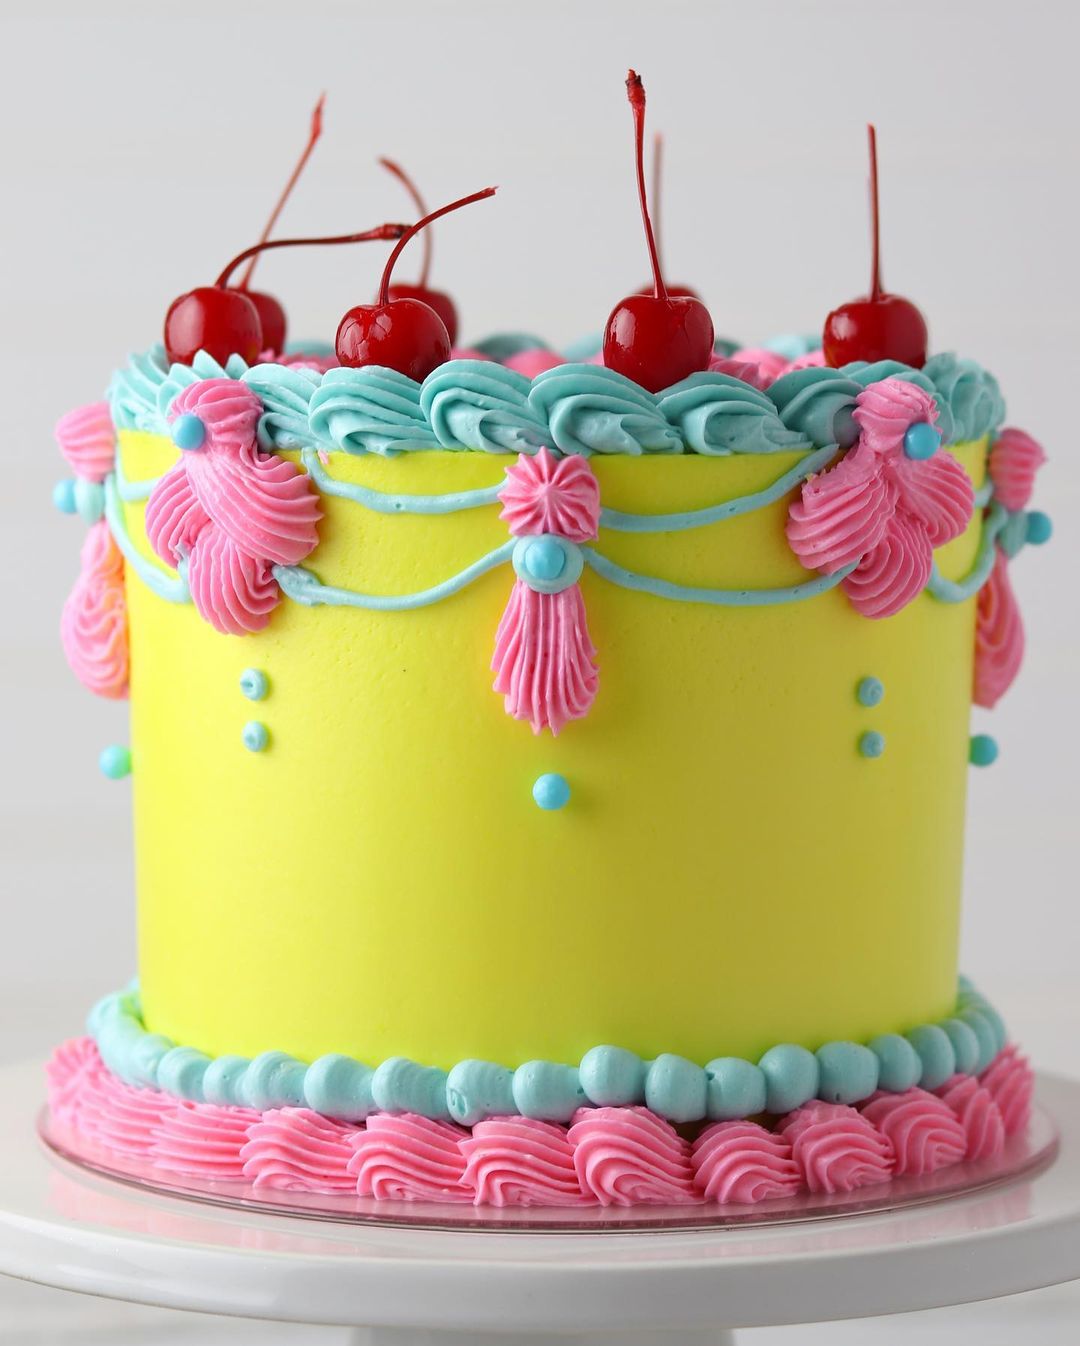 vintage piped cakes, All about vintage piped cakes (cake inspiration)